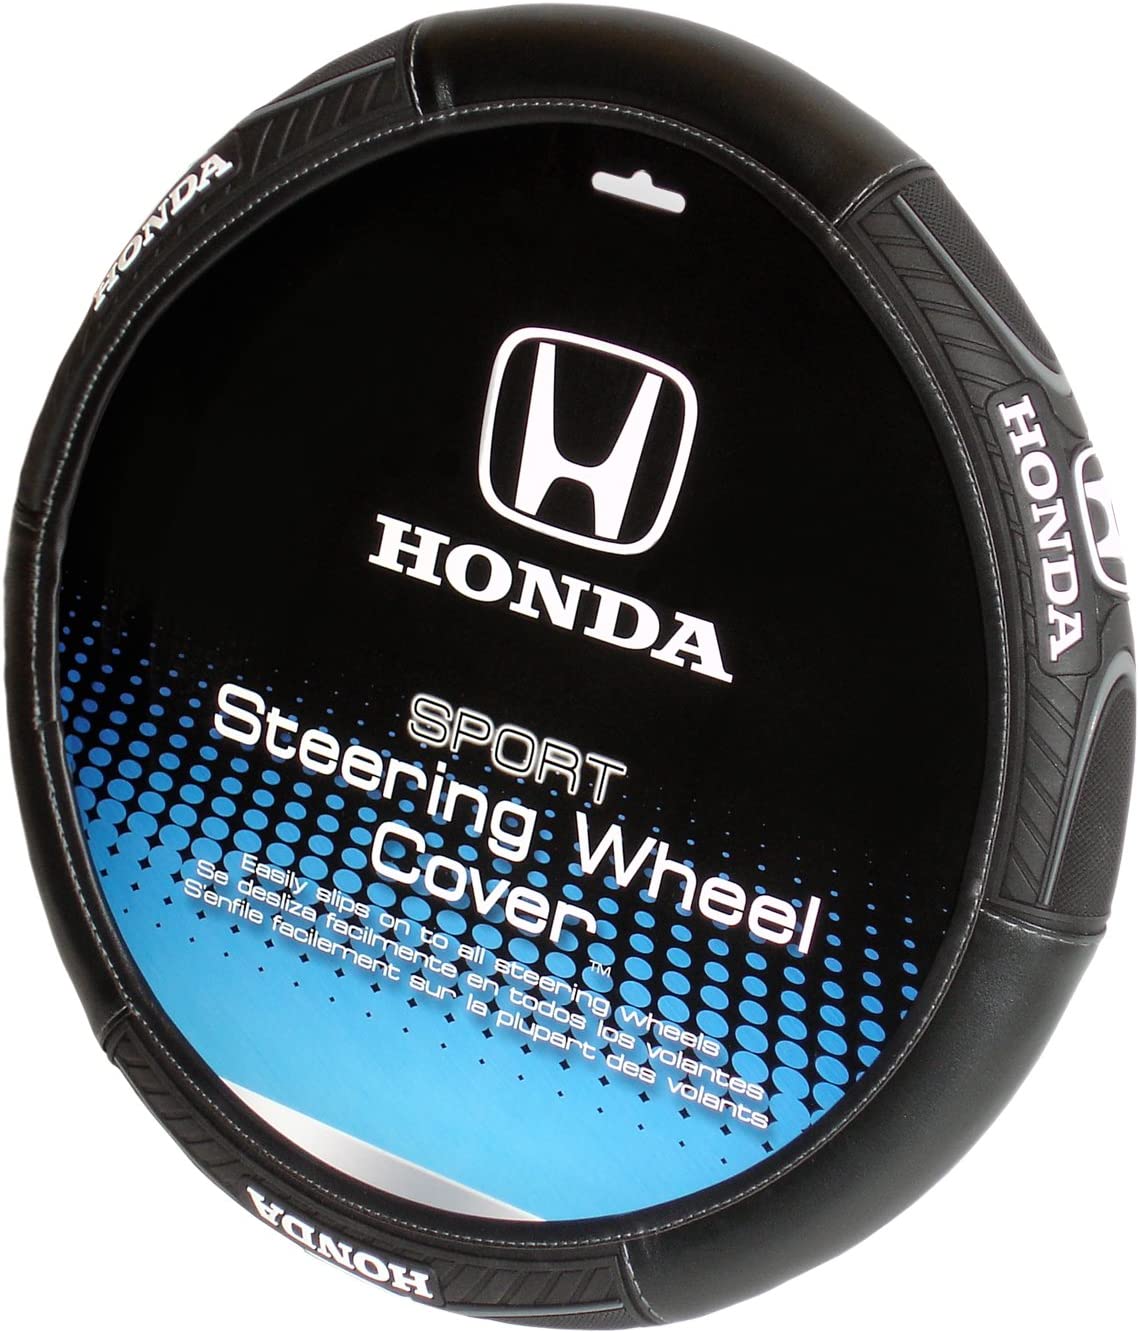 ::Honda Sport Grip Synthetic Leather Car/SUV/Truck Steering Wheel Cover New